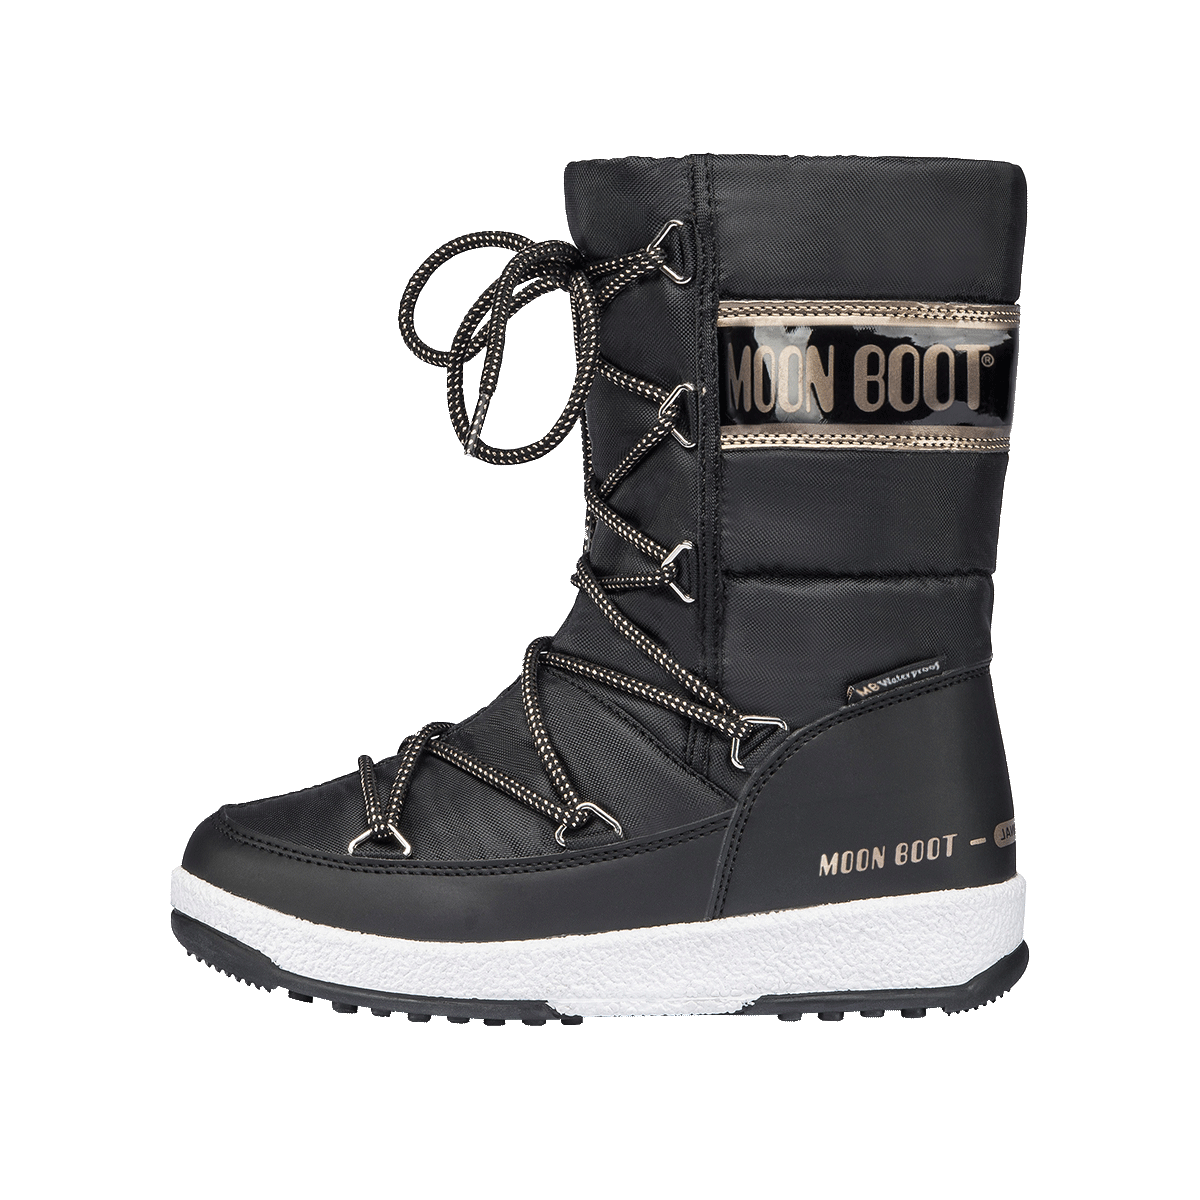 MOON BOOT JR G.QUILTED WP BLACK/COPPER